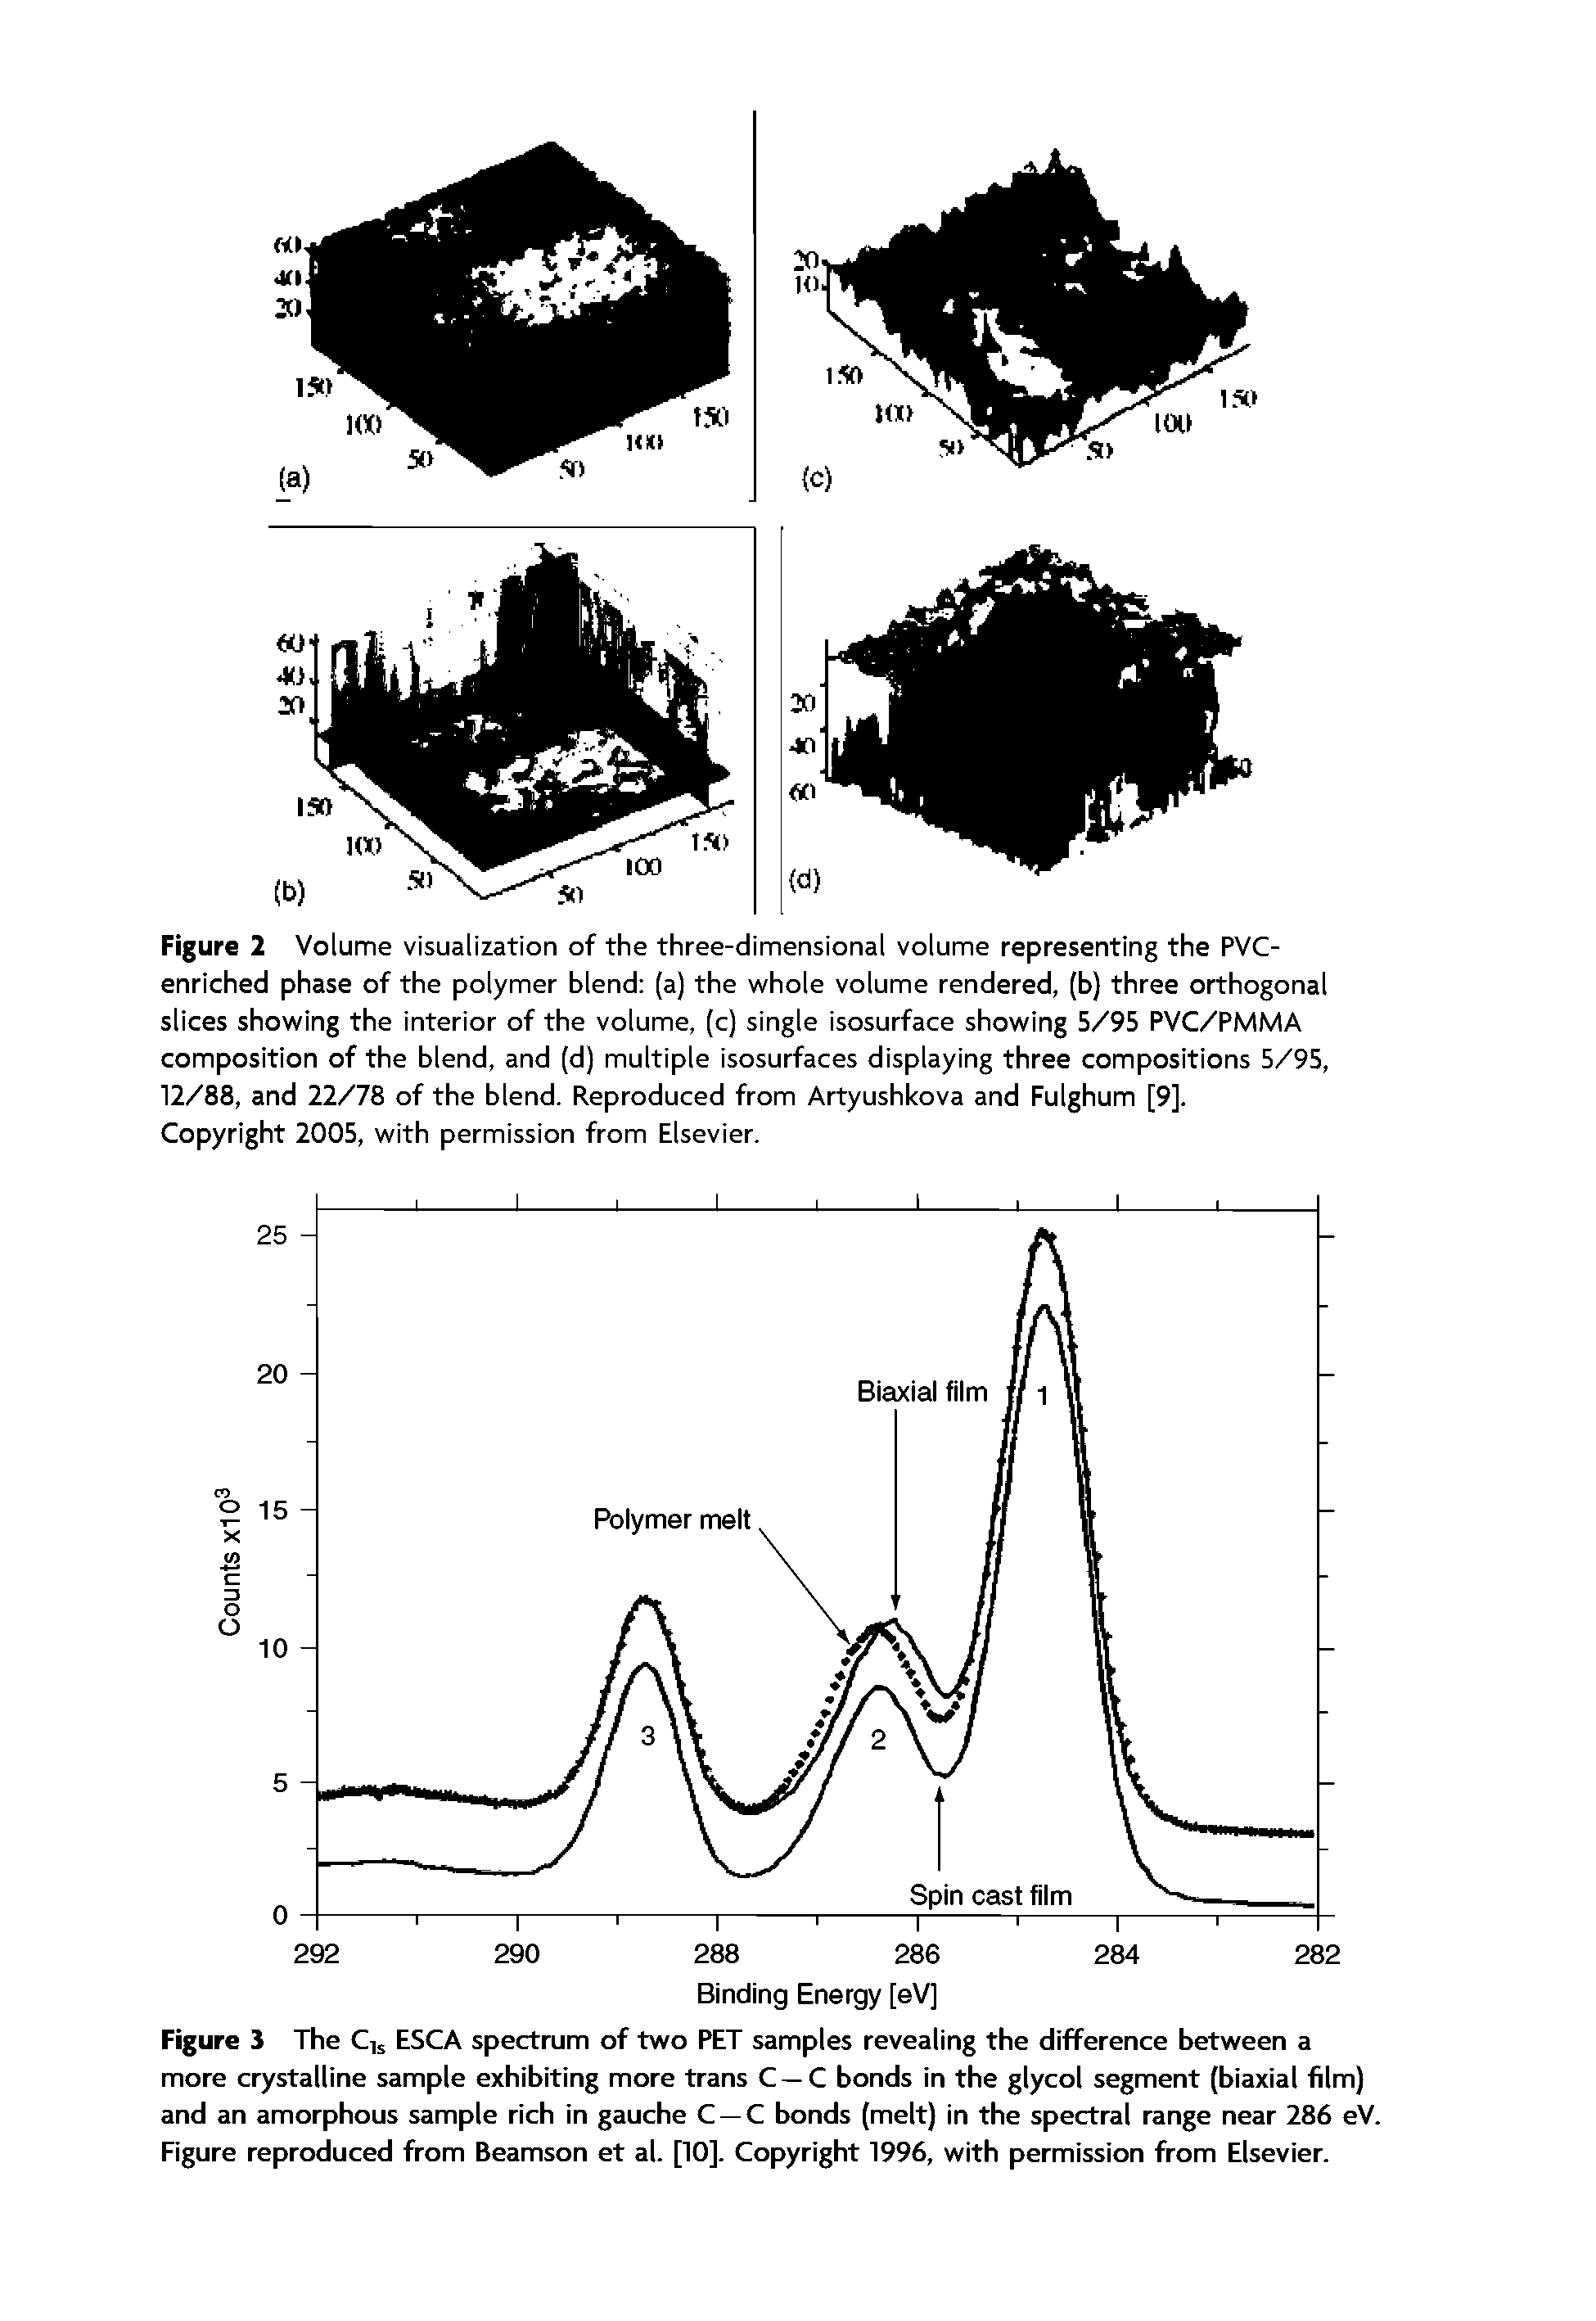 Figure 3 The Cns ESCA spectrum of two PET samples revealing the difference between a more crystalline sample exhibiting more trans C —C bonds in the glycol segment (biaxial film) and an amorphous sample rich in gauche C —C bonds (melt) in the spectral range near 286 eV. Figure reproduced from Beamson et al. [10]. Copyright 1996, with permission from Elsevier.